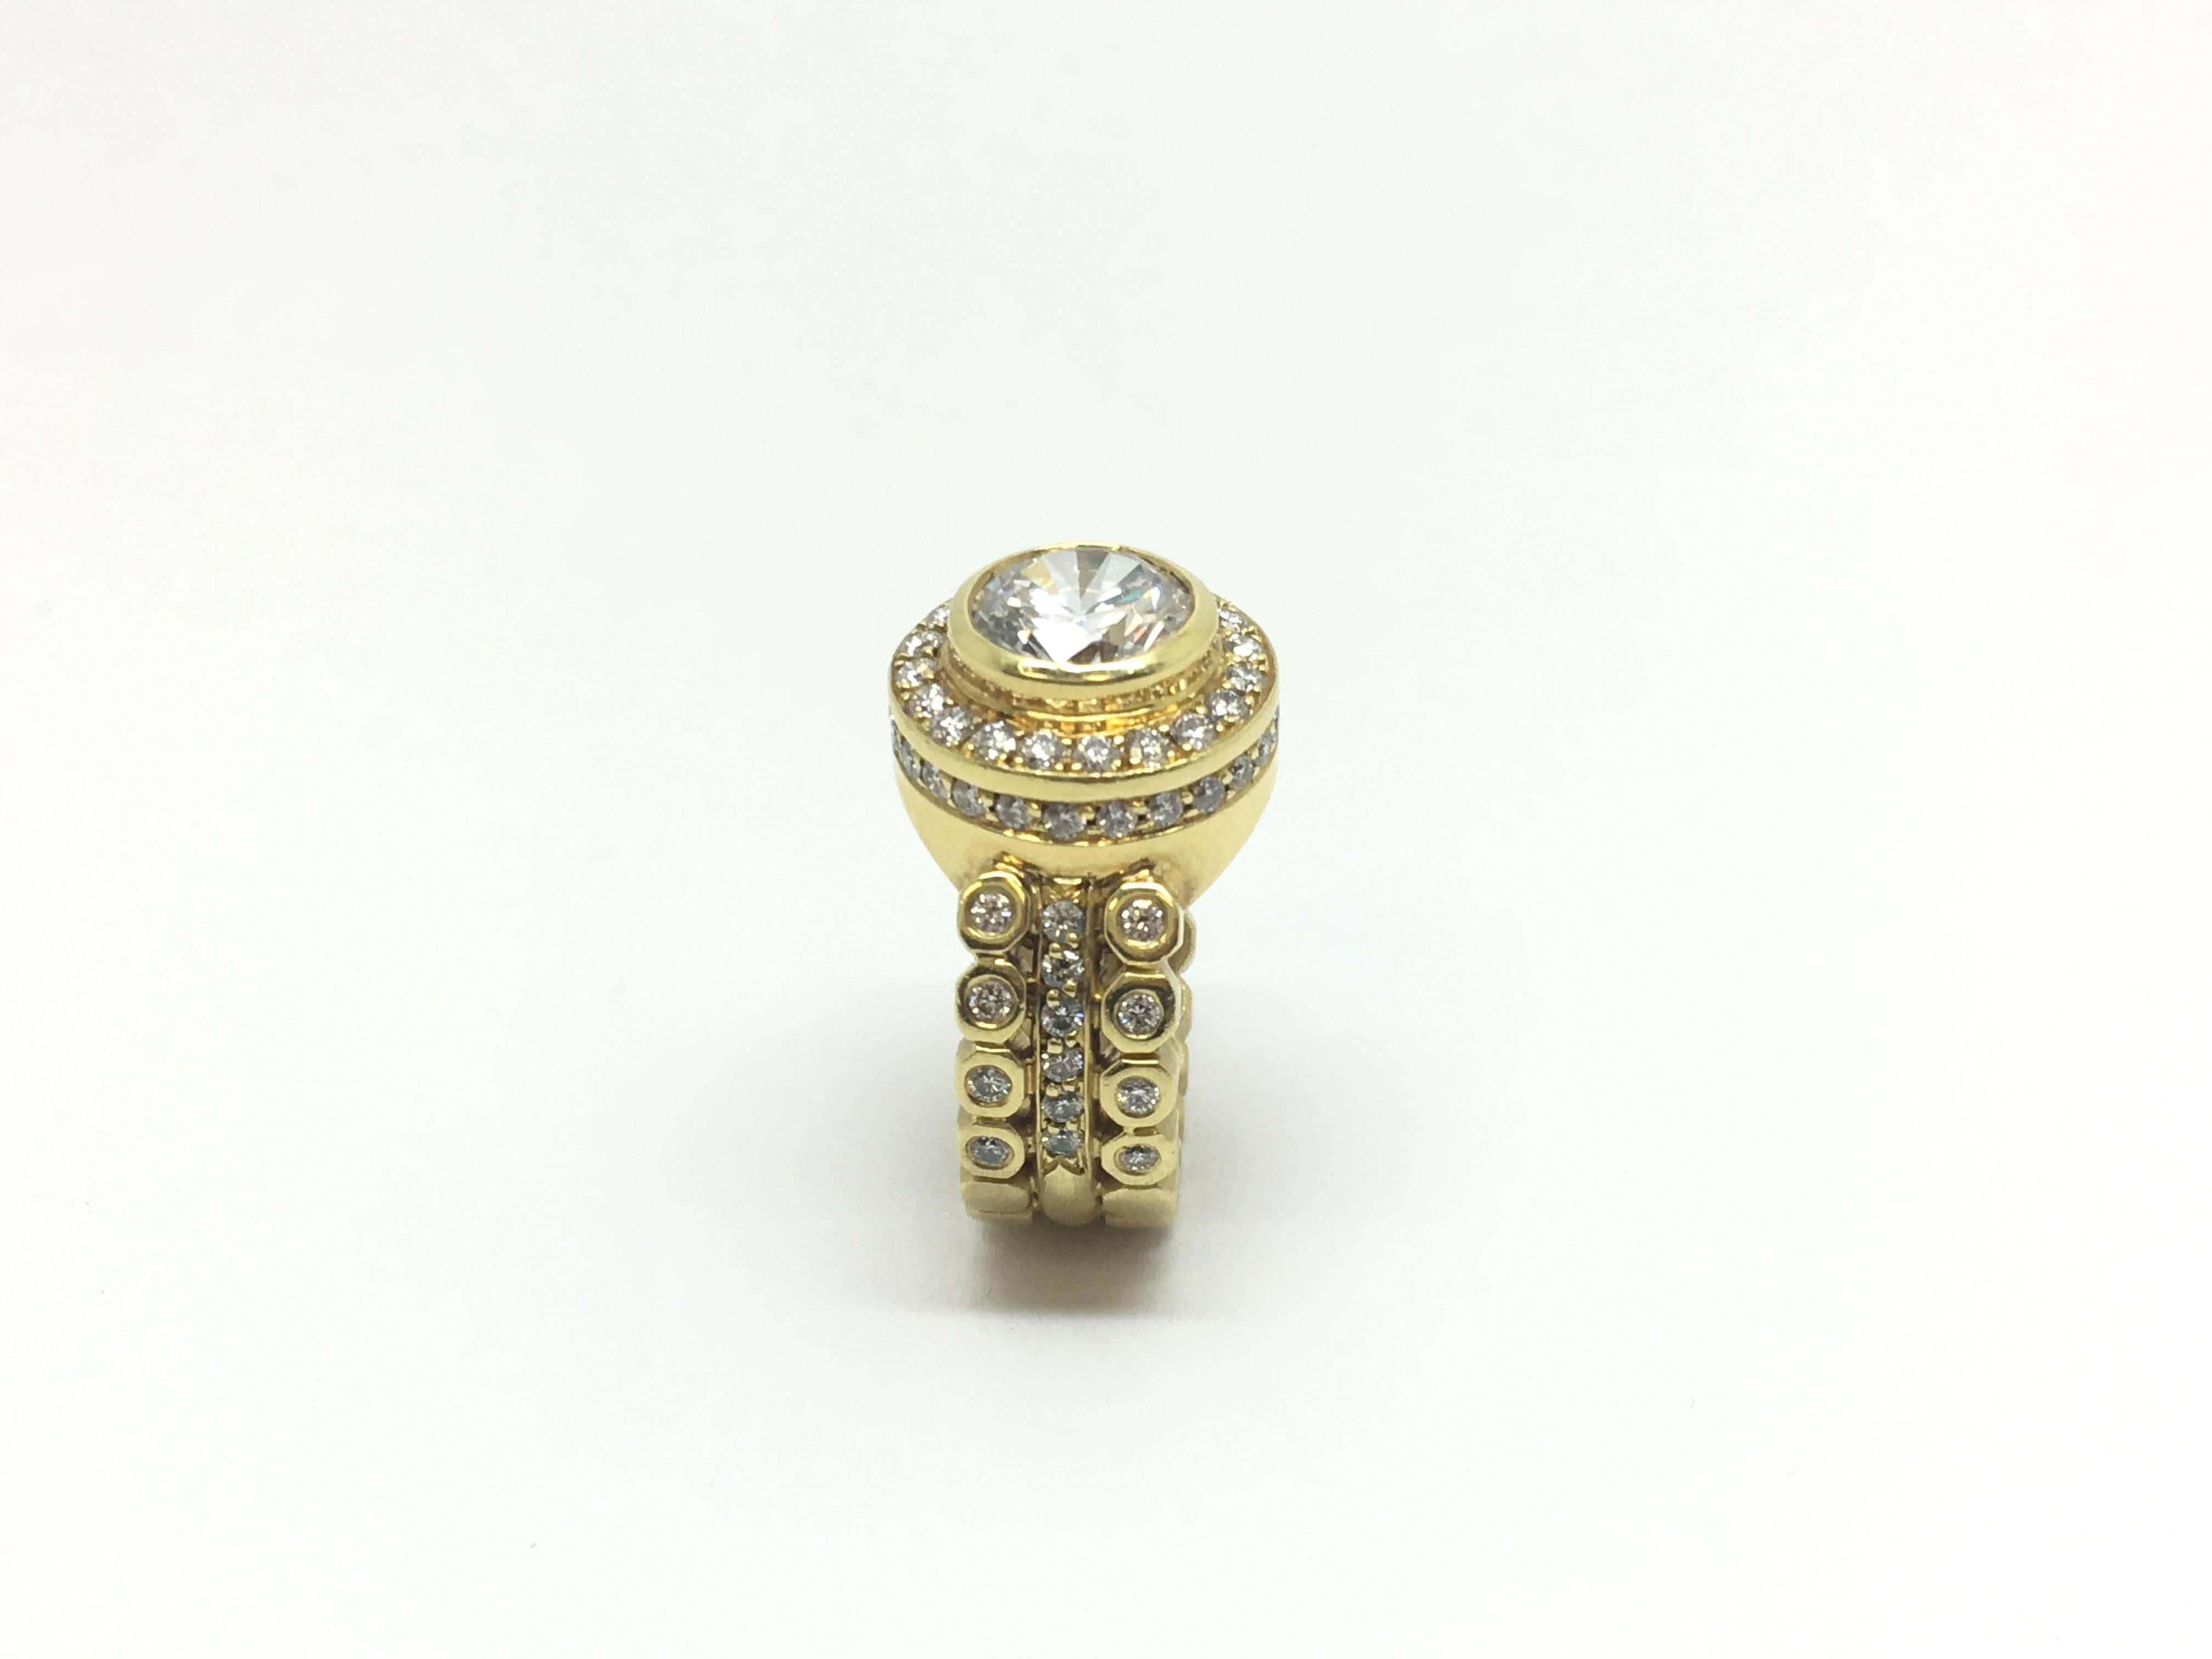 Doris Panos 18kt yellow gold semi mount ring with cubic zirconia center 8.5mm round stone. This ring is set with approximately 1.18 carat total weight of diamonds, SI clarity, GH colour, medium to good cut. The circular design all the way around the